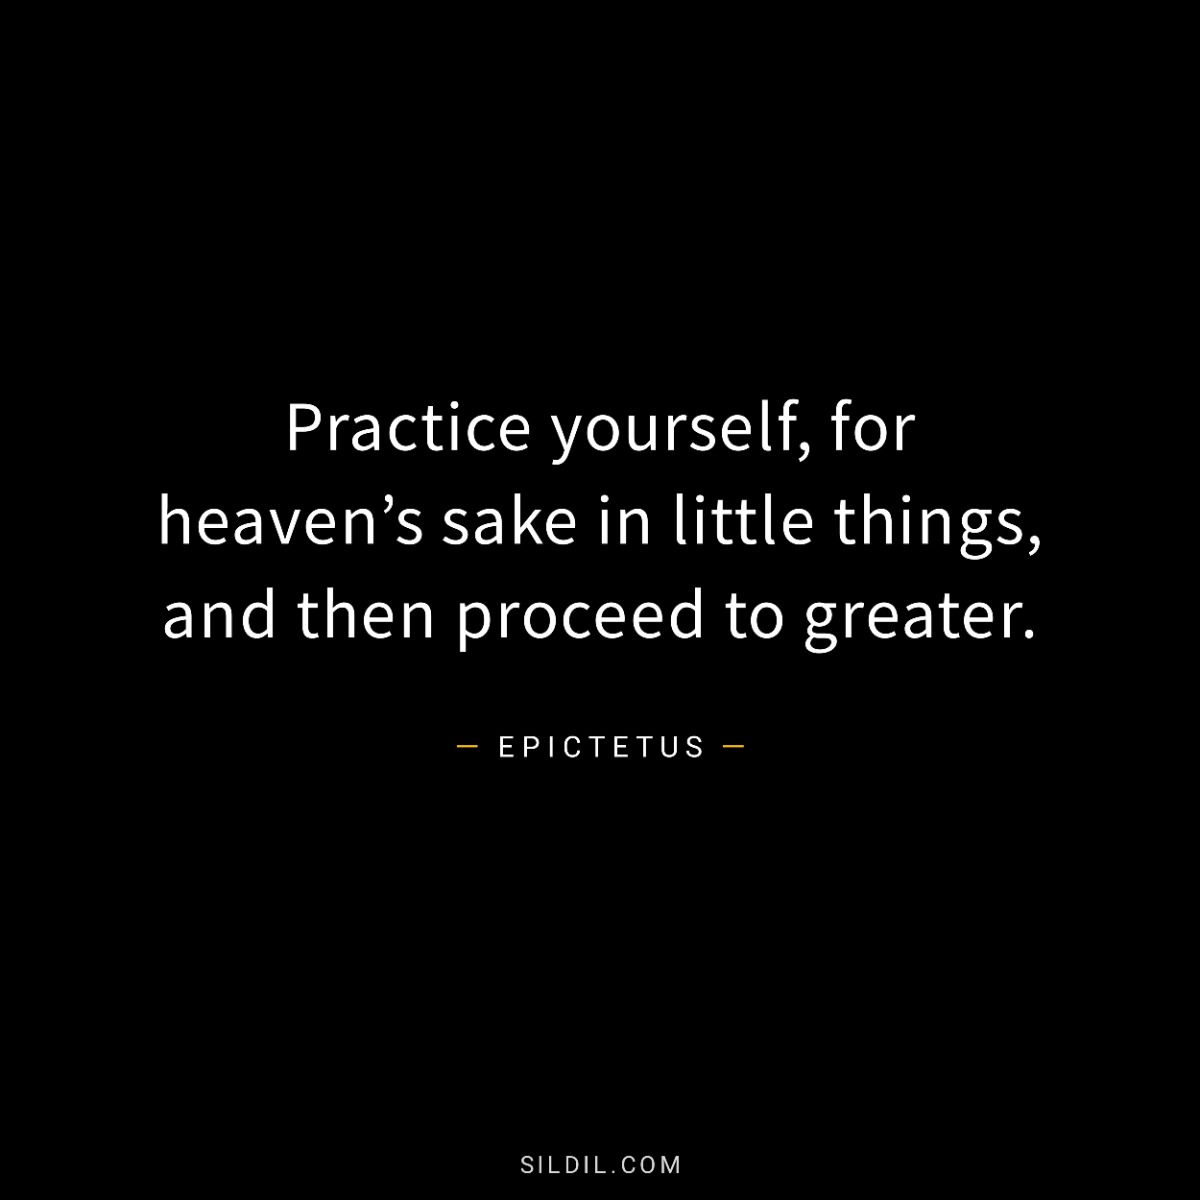 Practice yourself, for heaven’s sake in little things, and then proceed to greater.